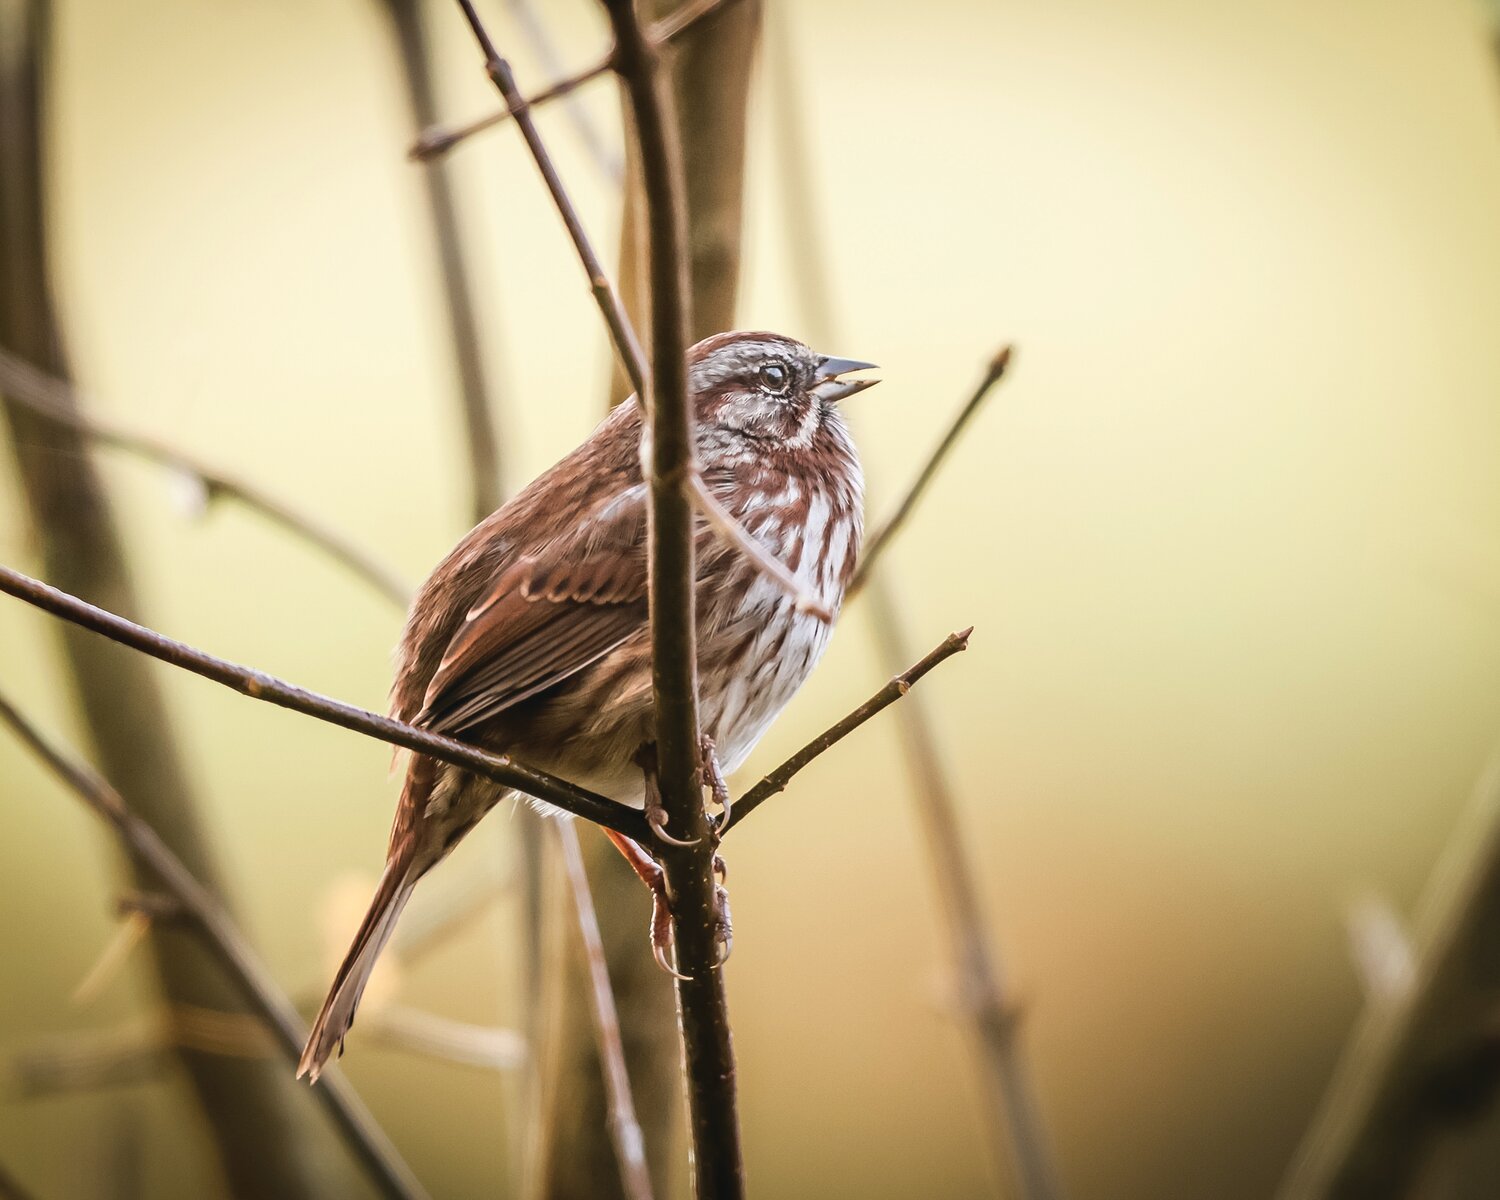 A song sparrow sings its song in a tree Tuesday, Oct. 31, at the River “S” Unit of the Ridgefield National Wildlife Refuge.